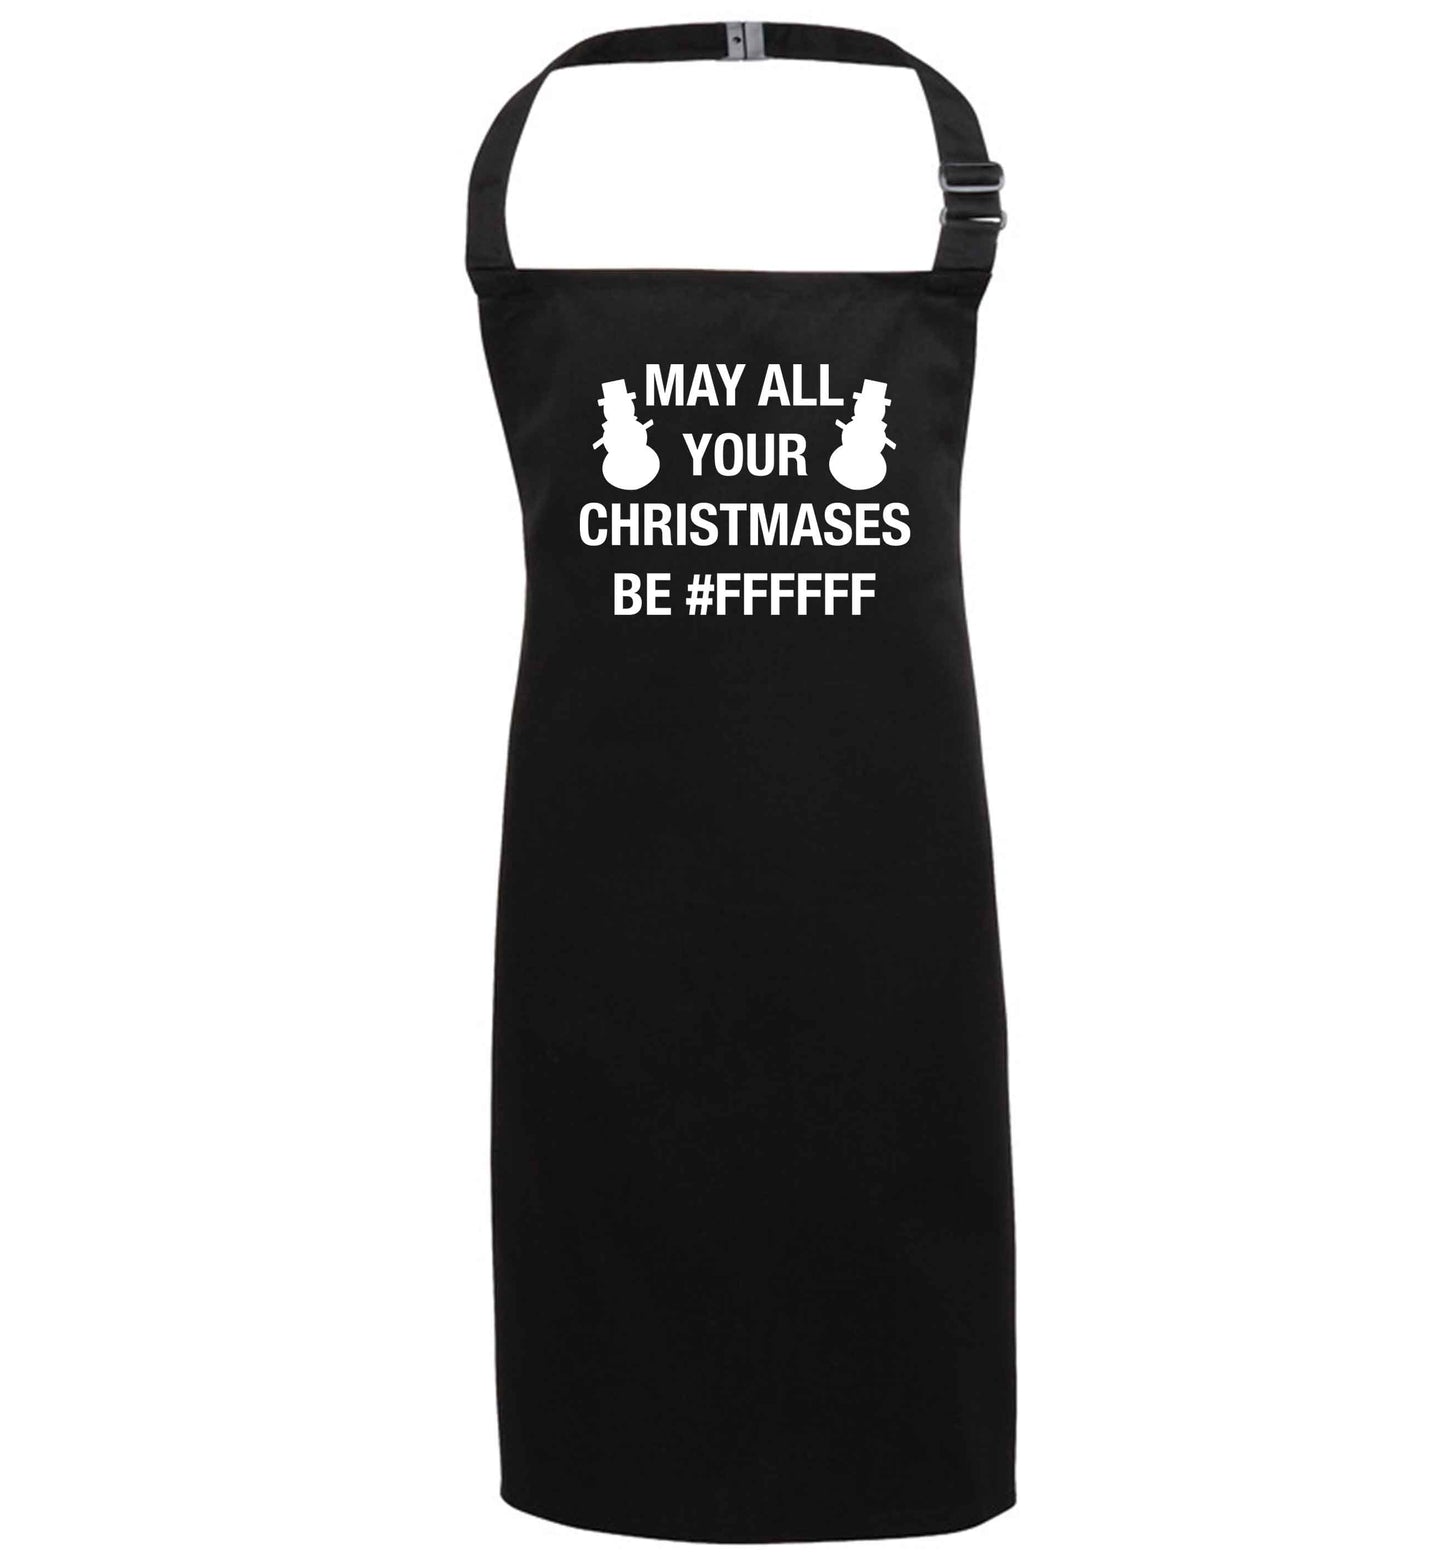 May all your Christmases be #FFFFFF black apron 7-10 years